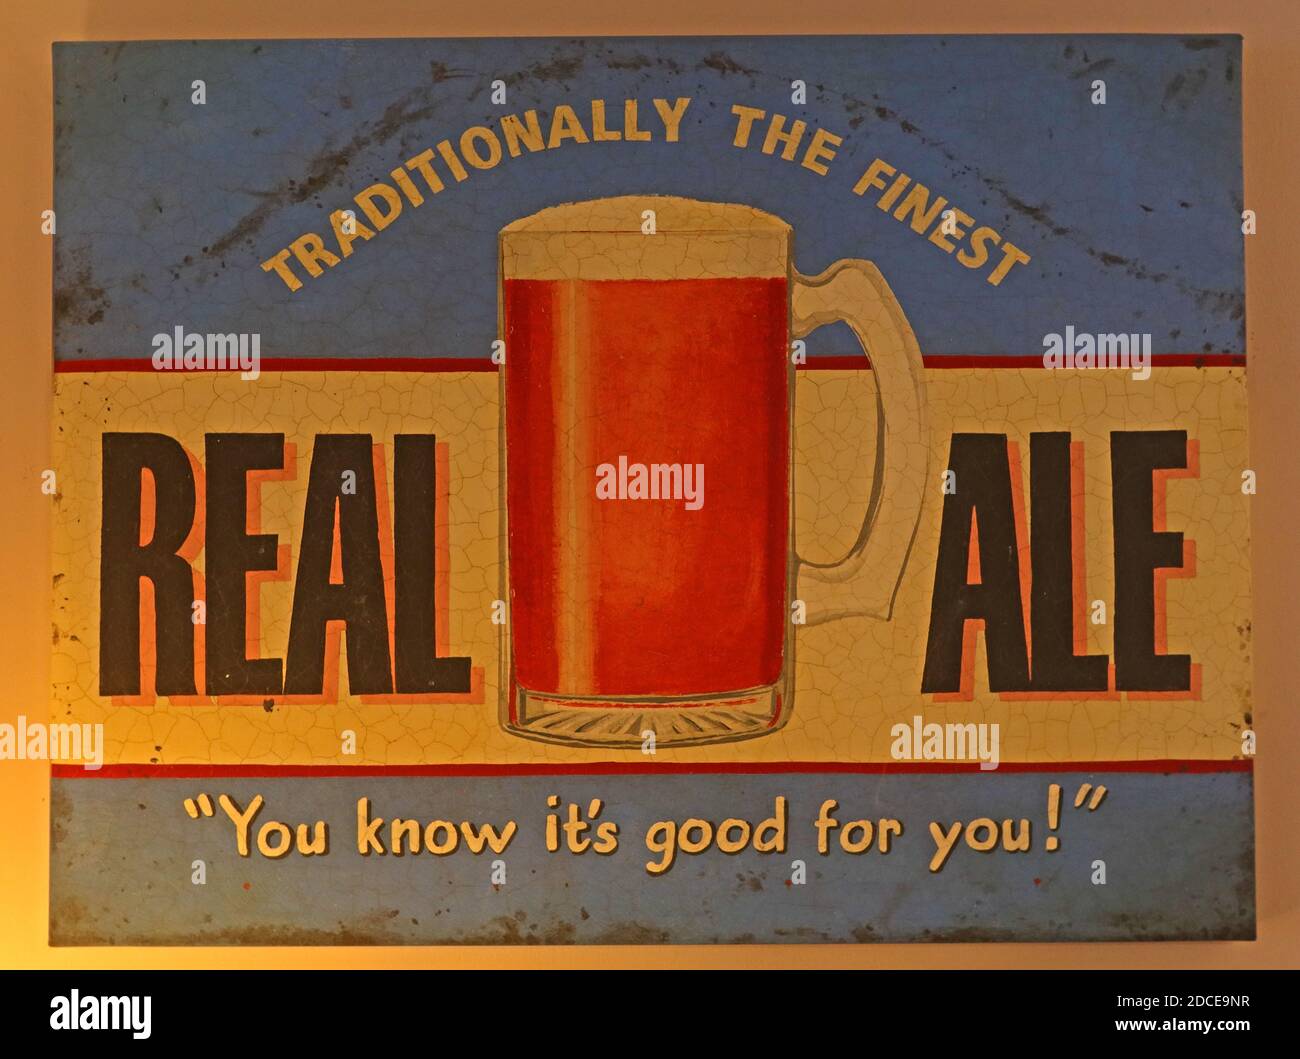 Traditionally the Finest,Real Ale,You Know its good for you,sign,pint pot,glass of beer Stock Photo